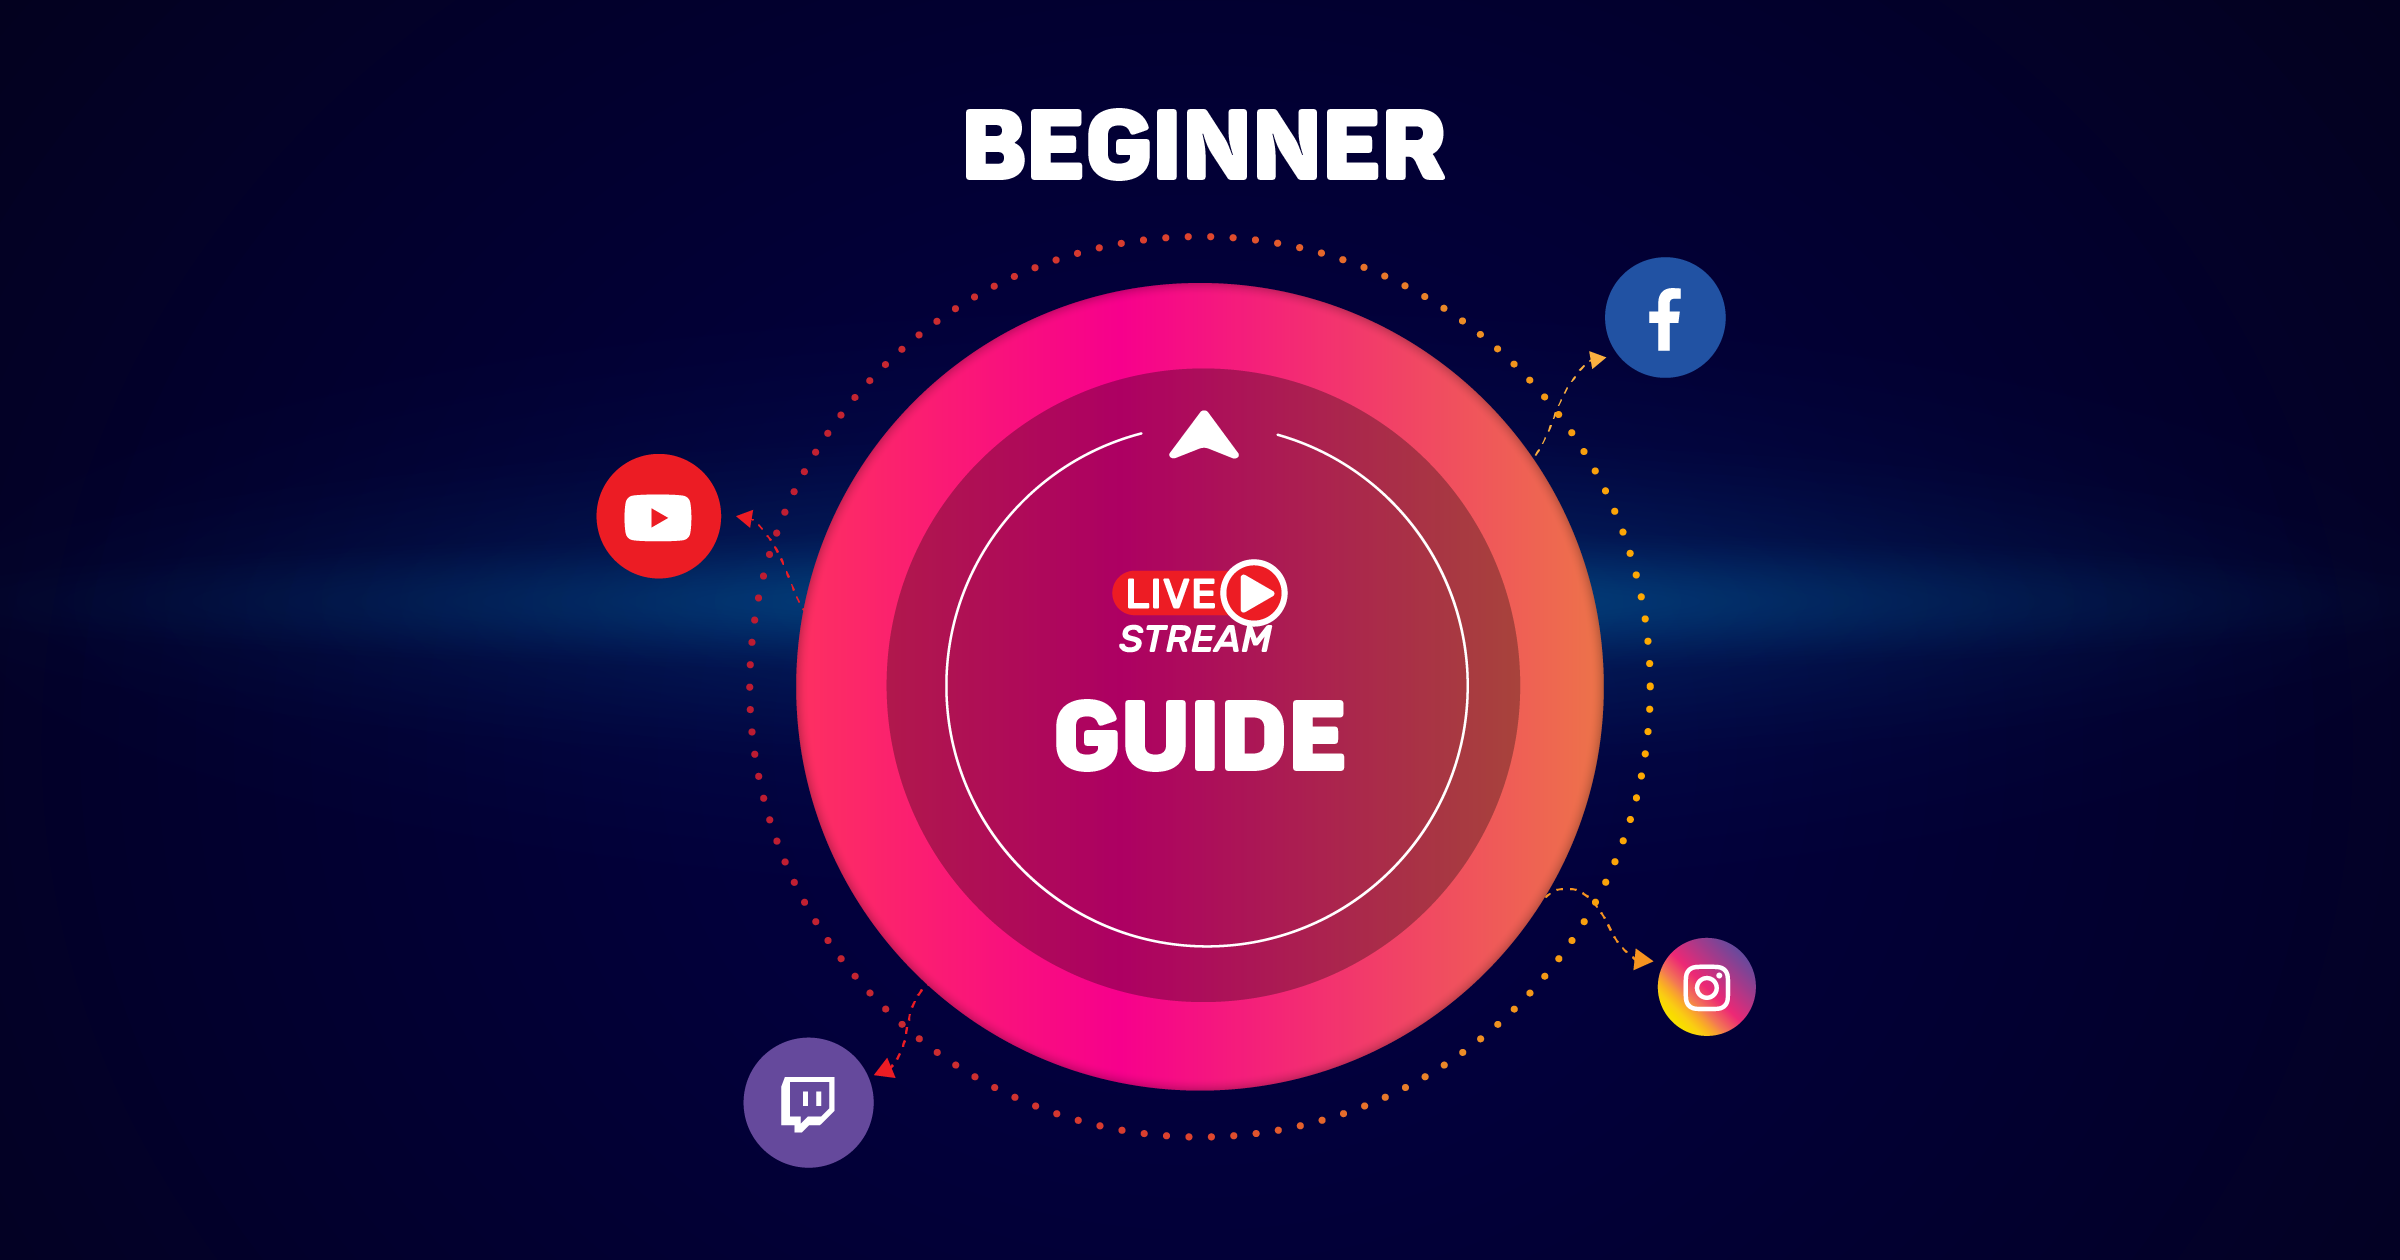 Beginner's guide to live streaming